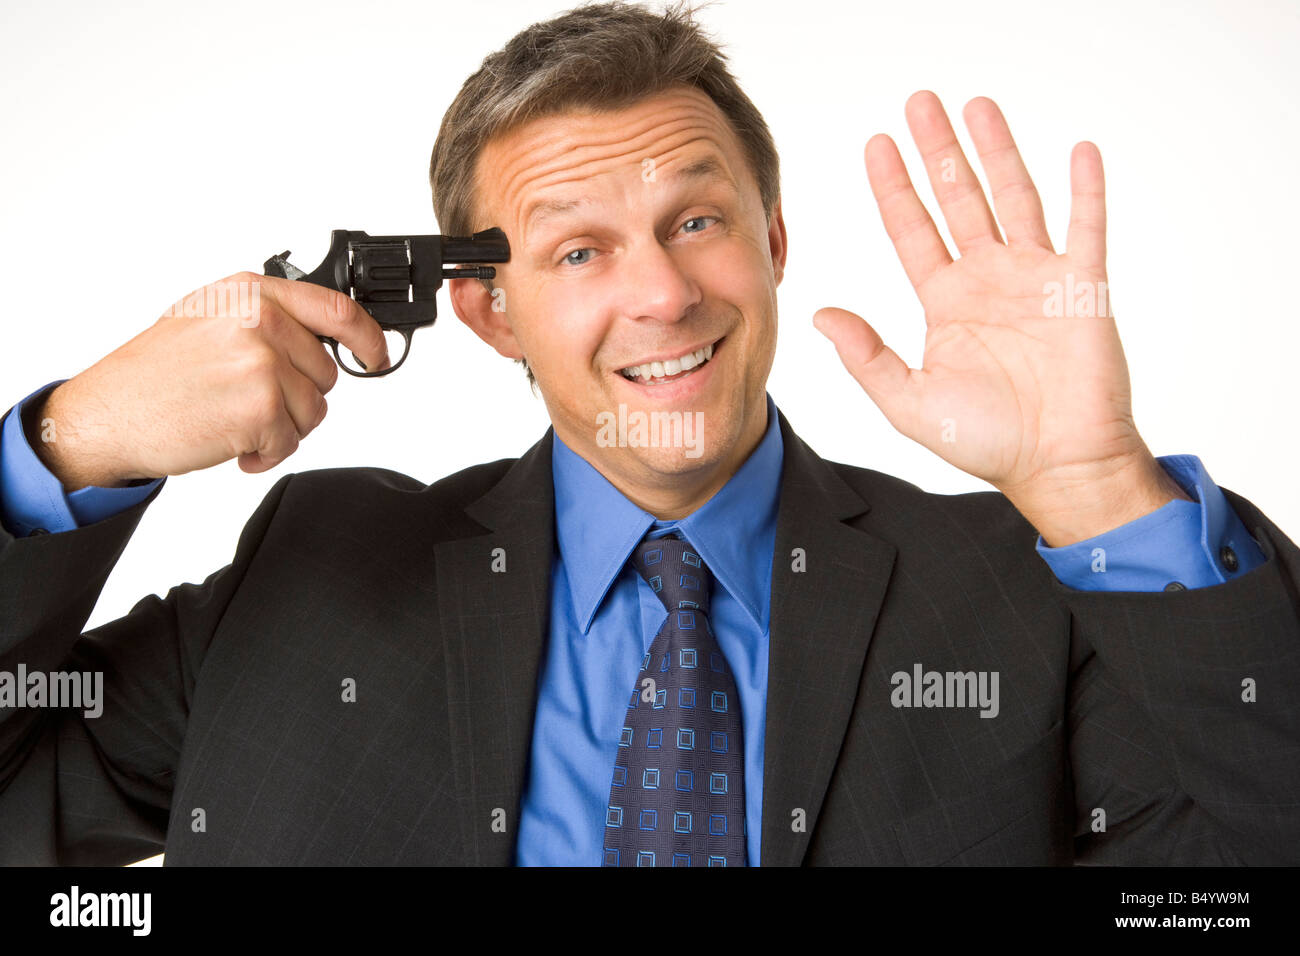 businessman-holding-gun-to-his-head-while-smiling-and-waving-B4YW9M.jpg